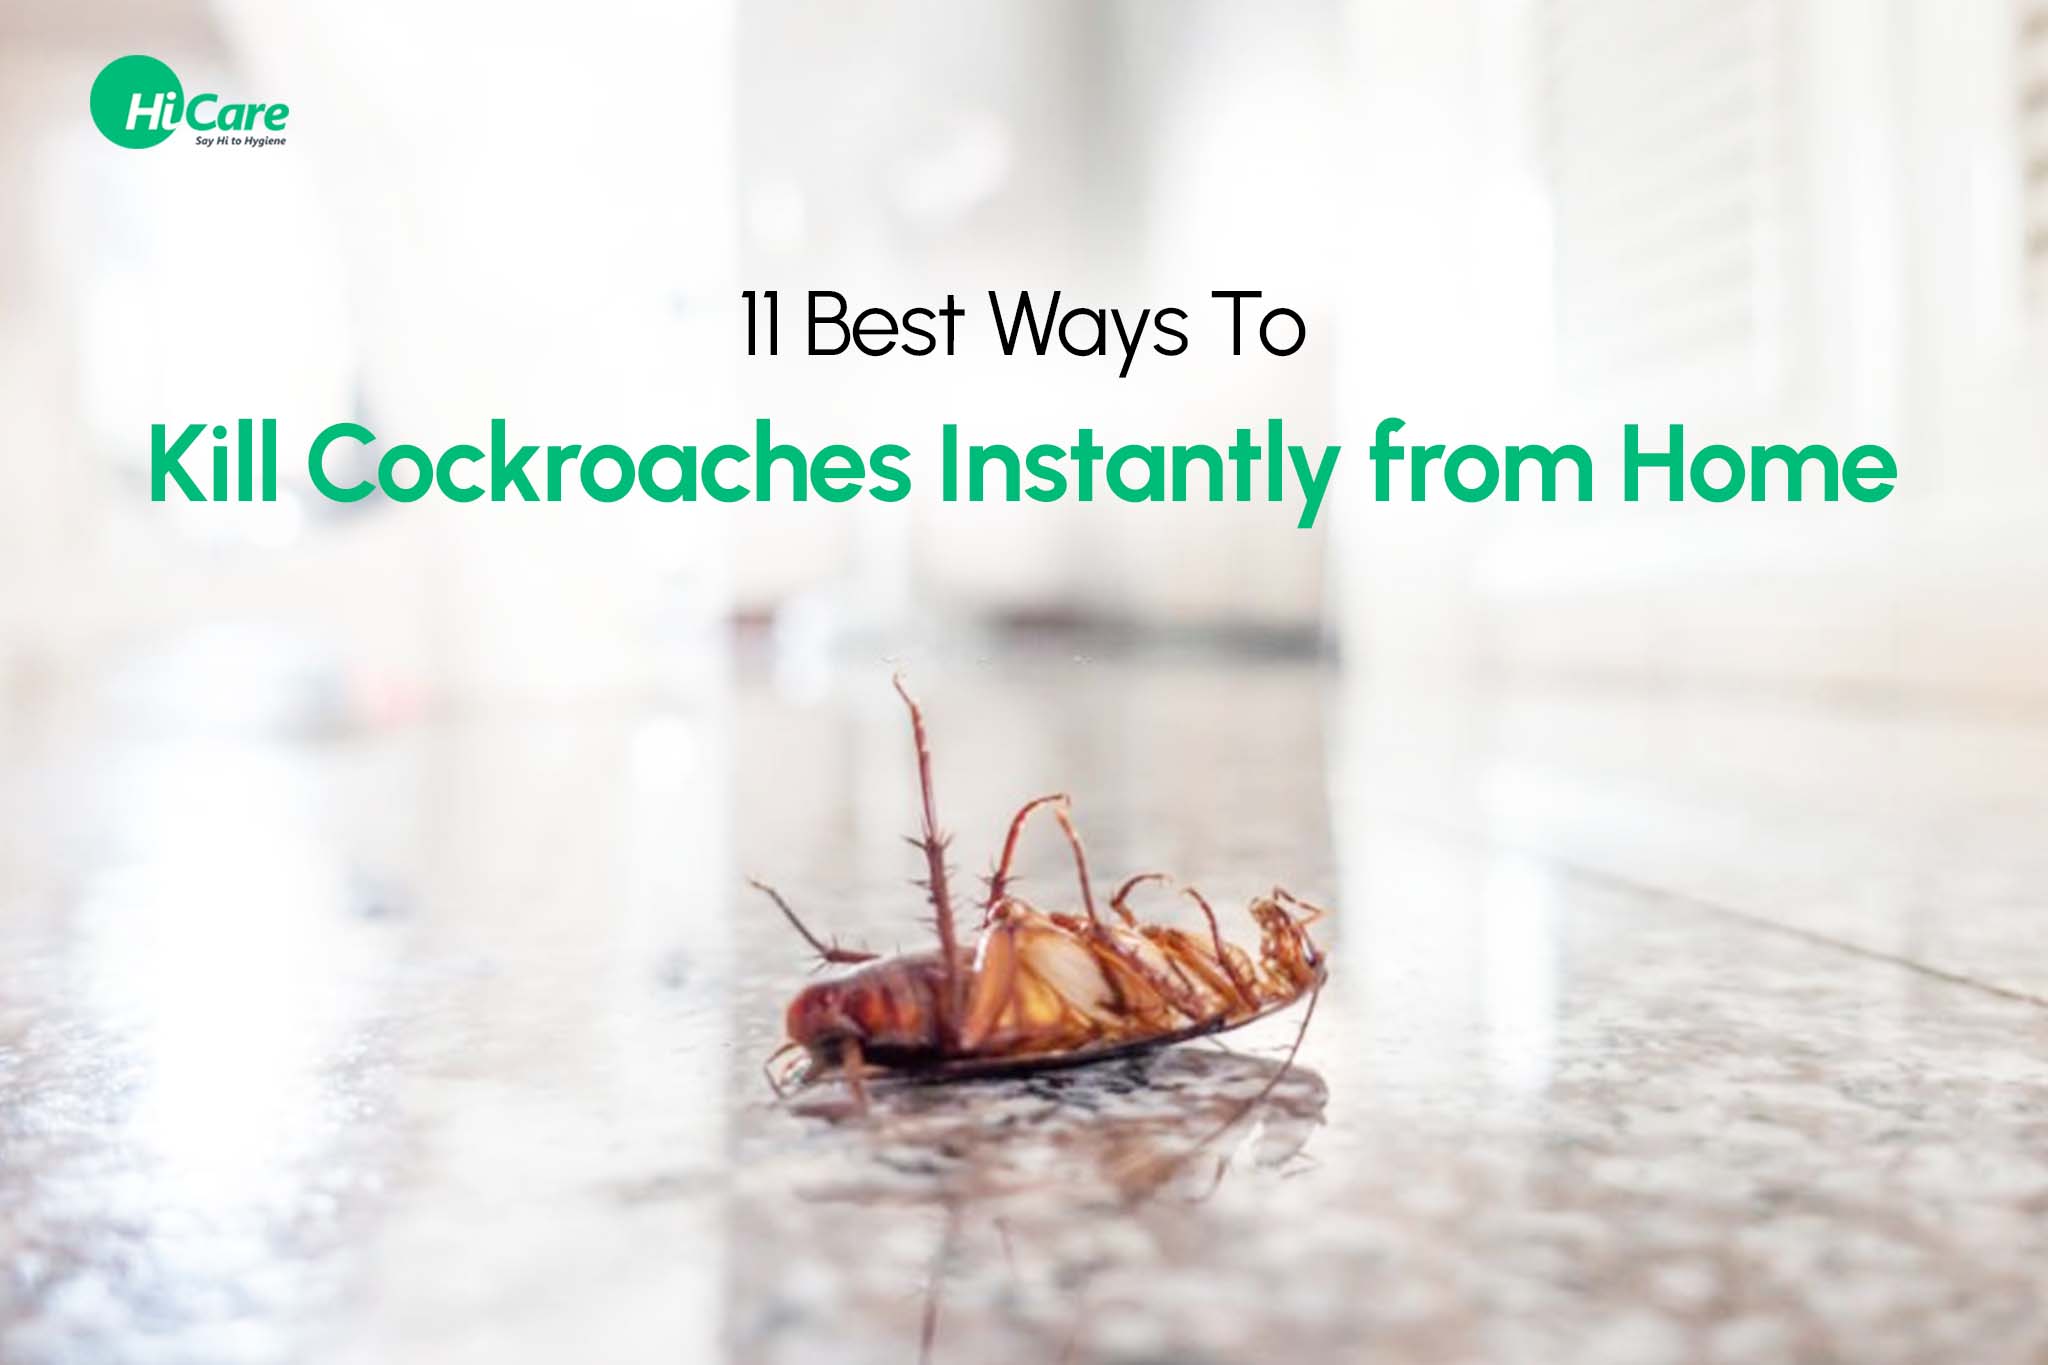 11 Best Ways To Kill Cockroaches Instantly from Home